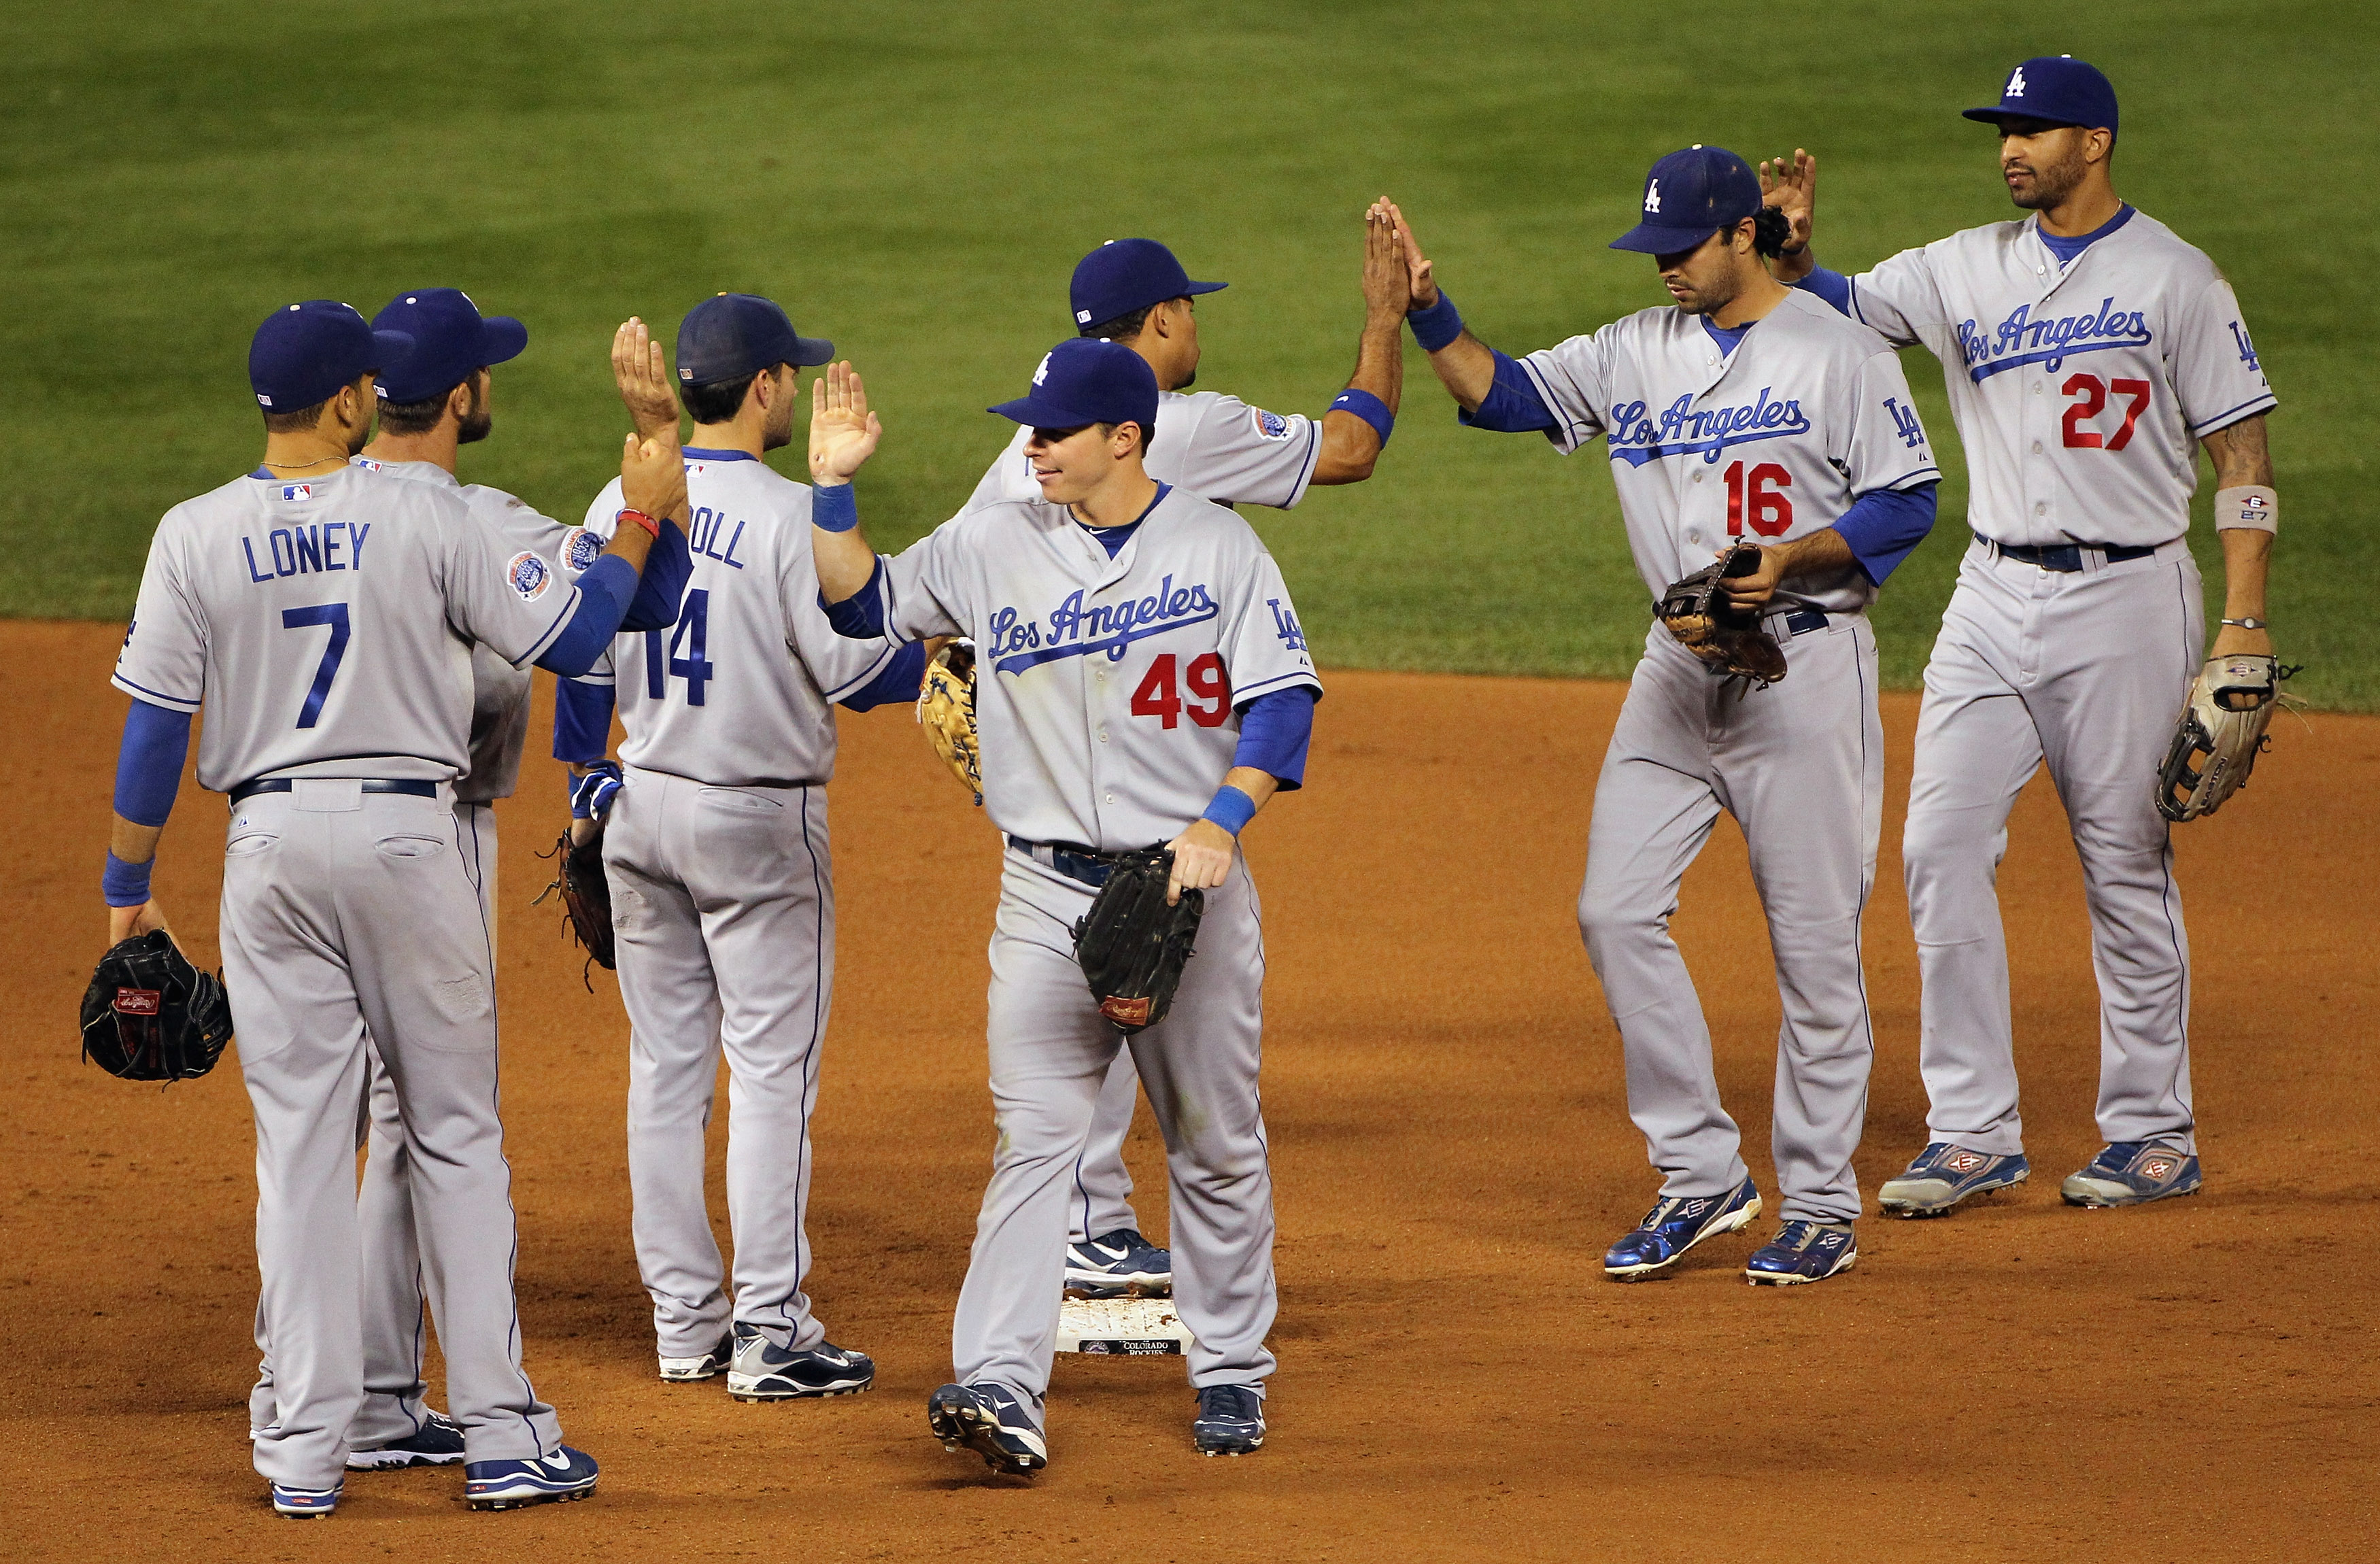 DENVER - SEPTEMBER 27:  The Los Angeles Dodgers celebrate their victory over the Colorado Rockies at Coors Field on September 25, 2010 in Denver, Colorado.The Dodgers defeated the Rockies 3-1.  (Photo by Doug Pensinger/Getty Images)